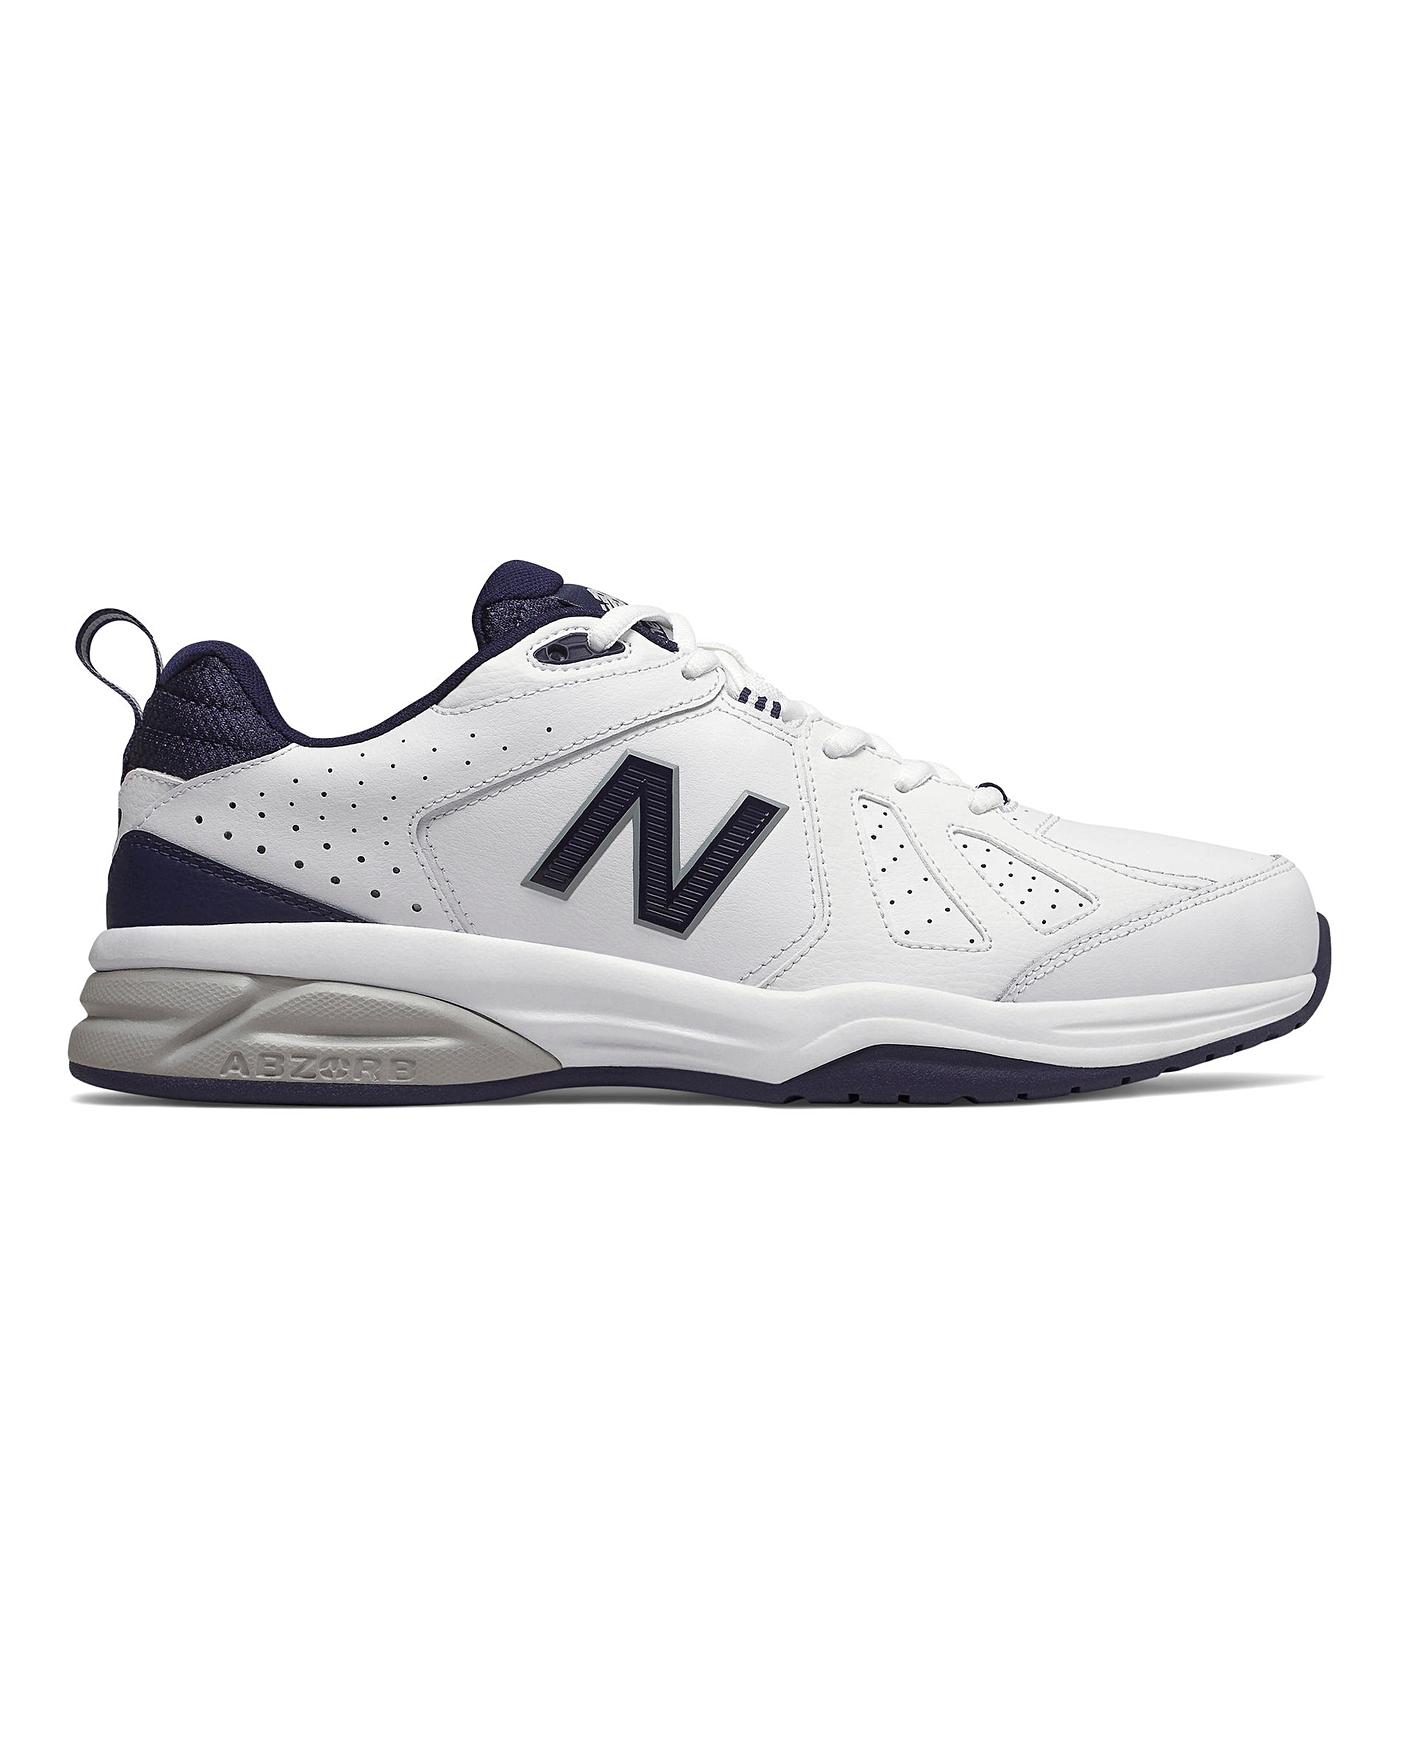 New Balance MX624 Trainers | Oxendales